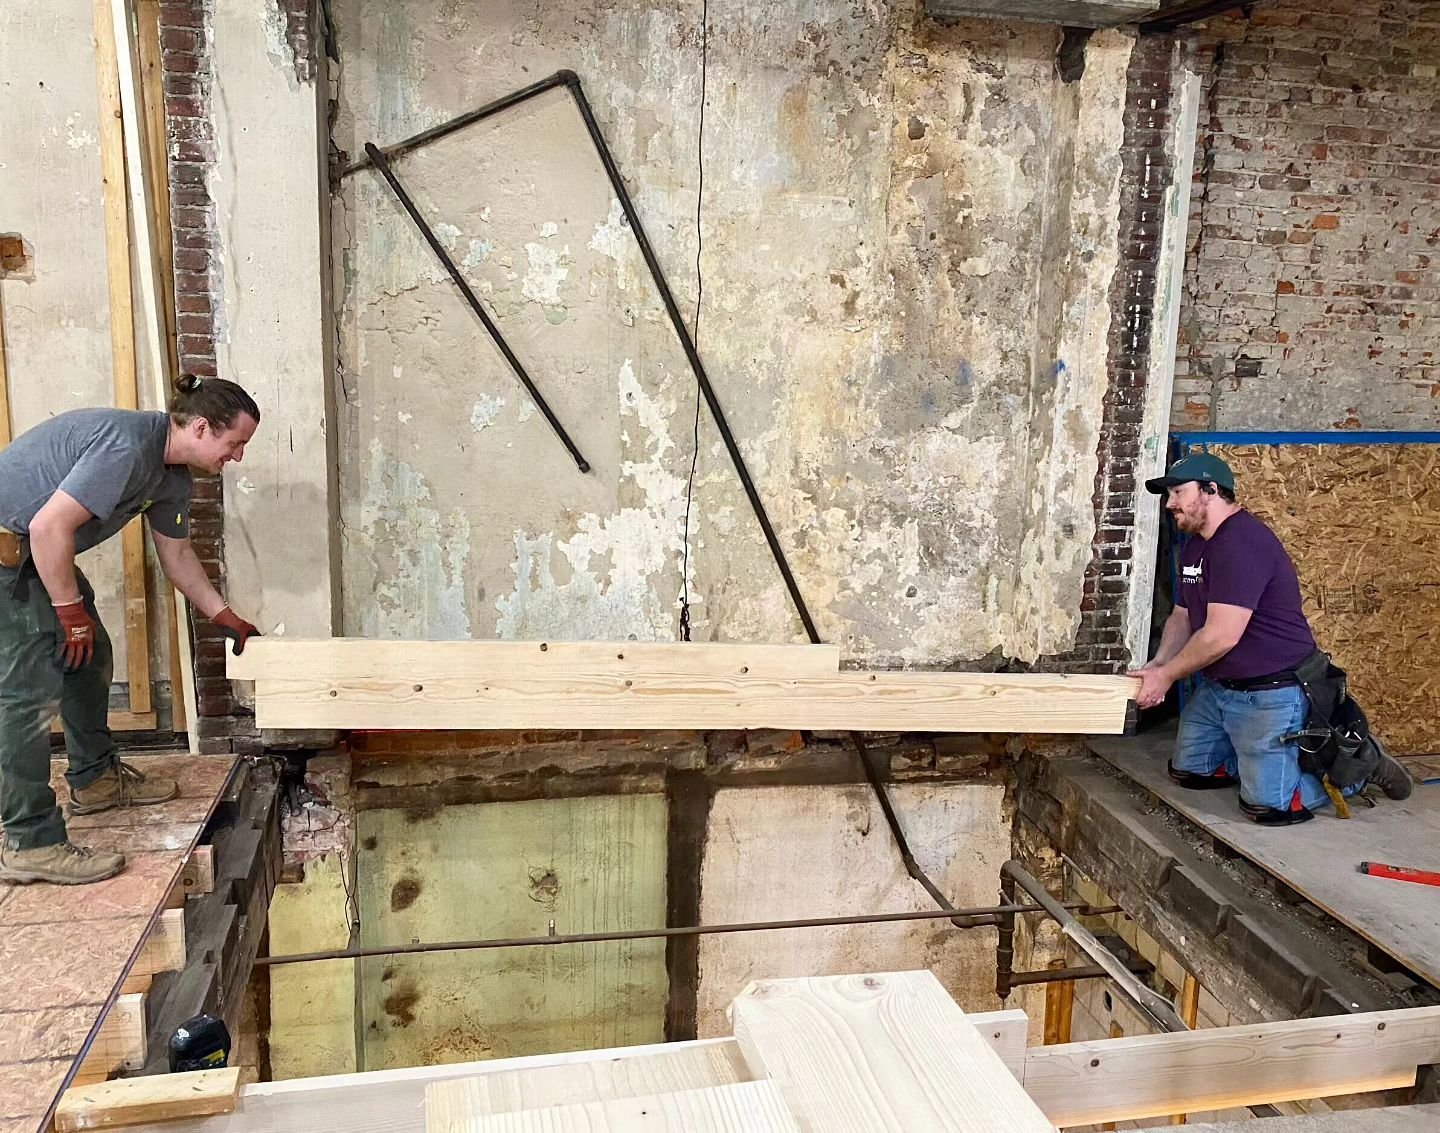 When we say remodeling is complex, this is what we mean. A joist shaped like a tetris piece.